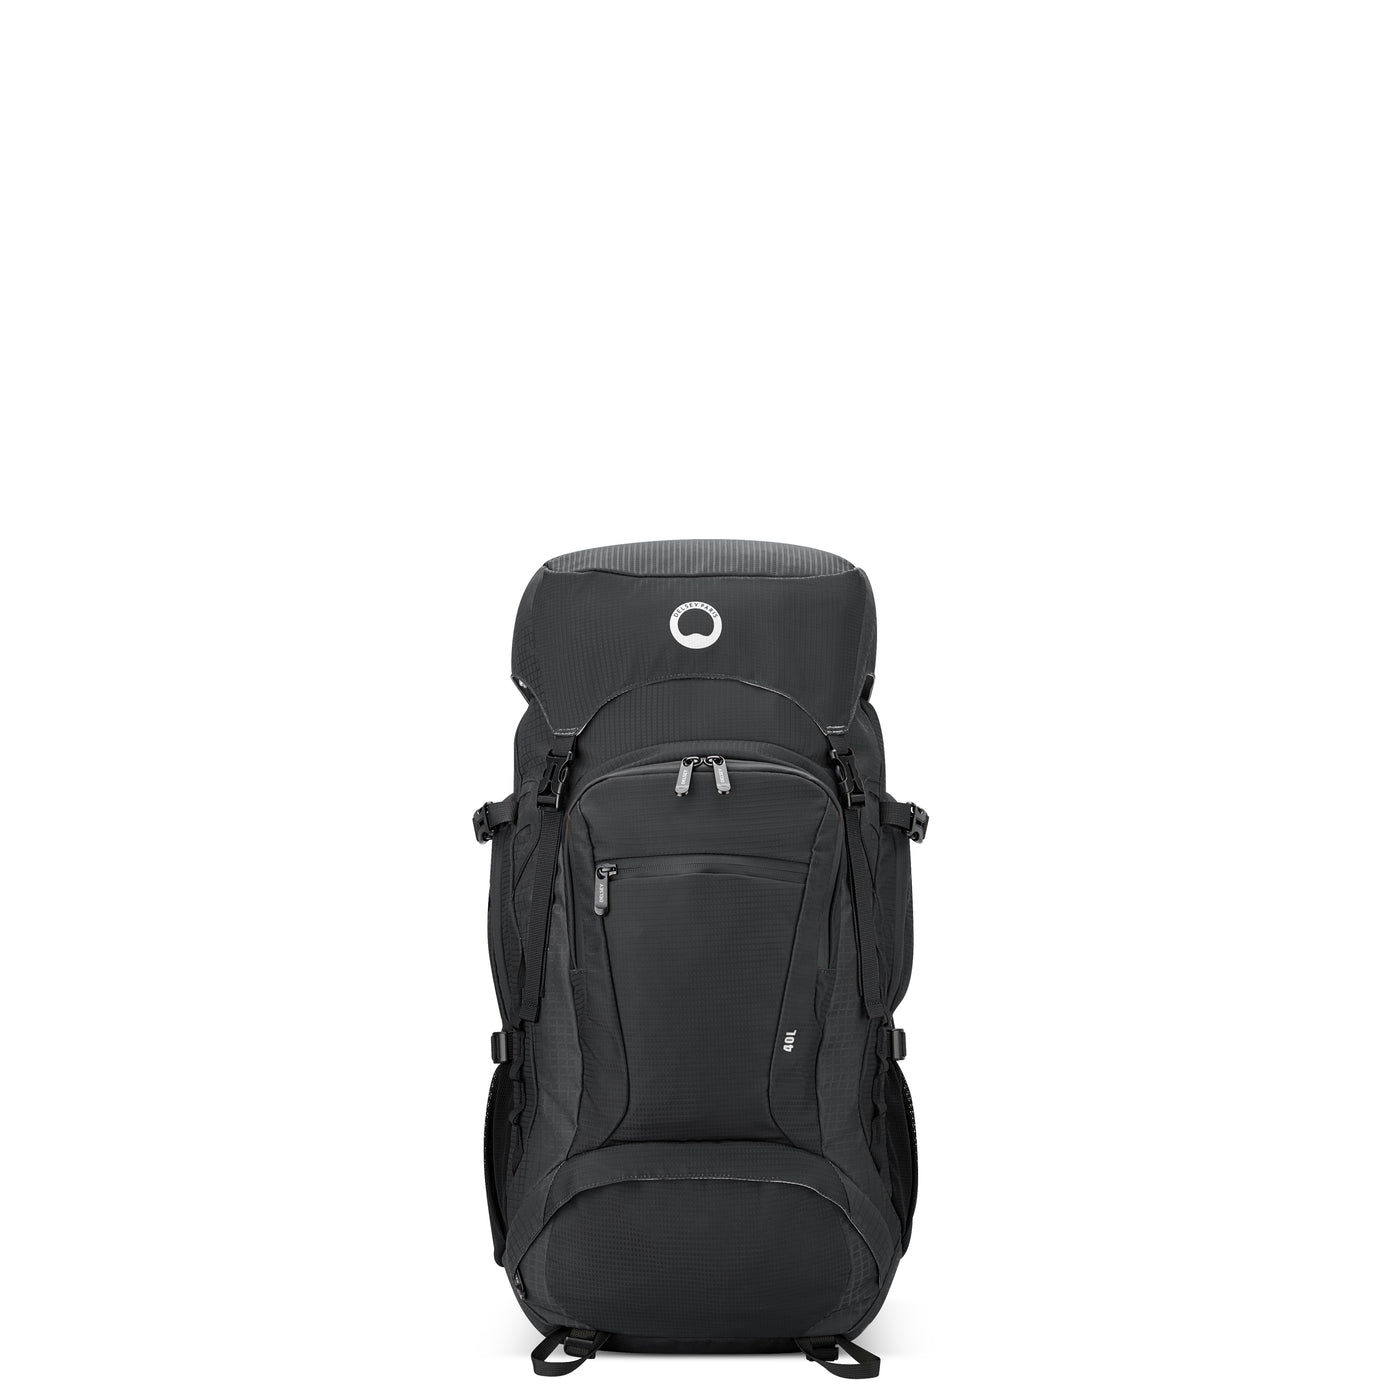 Shop The Latest Collection Of Delsey Nomade Backpack L In Lebanon